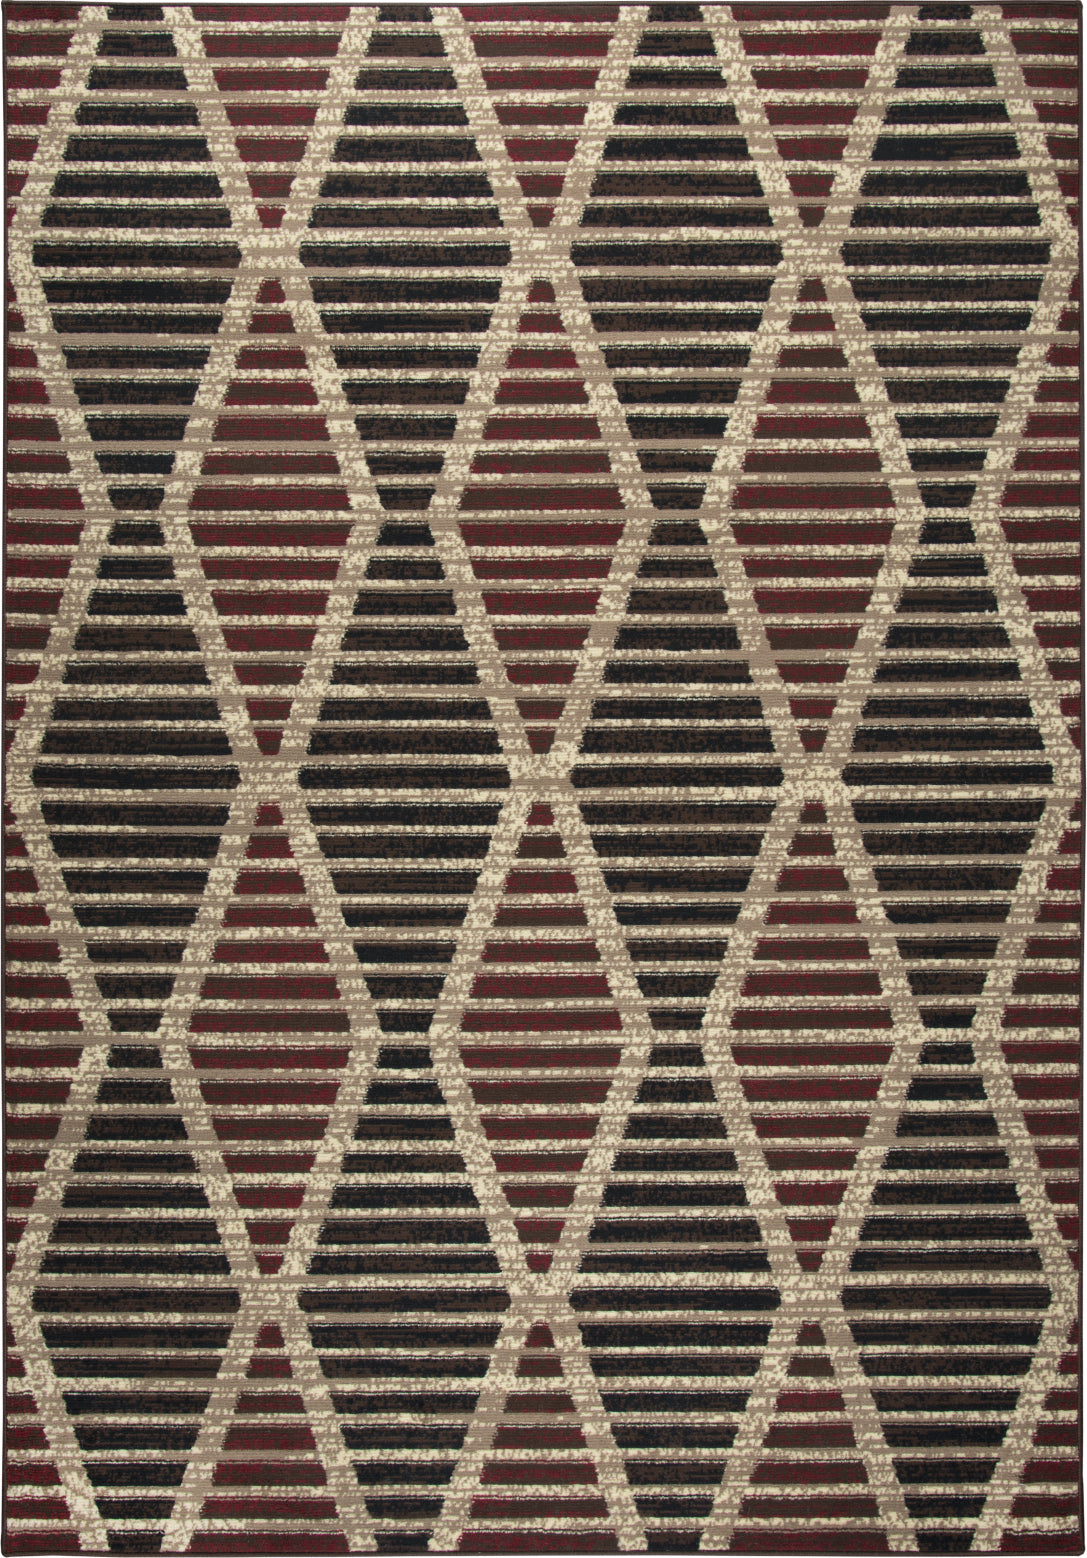 Rizzy Xcite XI6917 Beige Area Rug main image